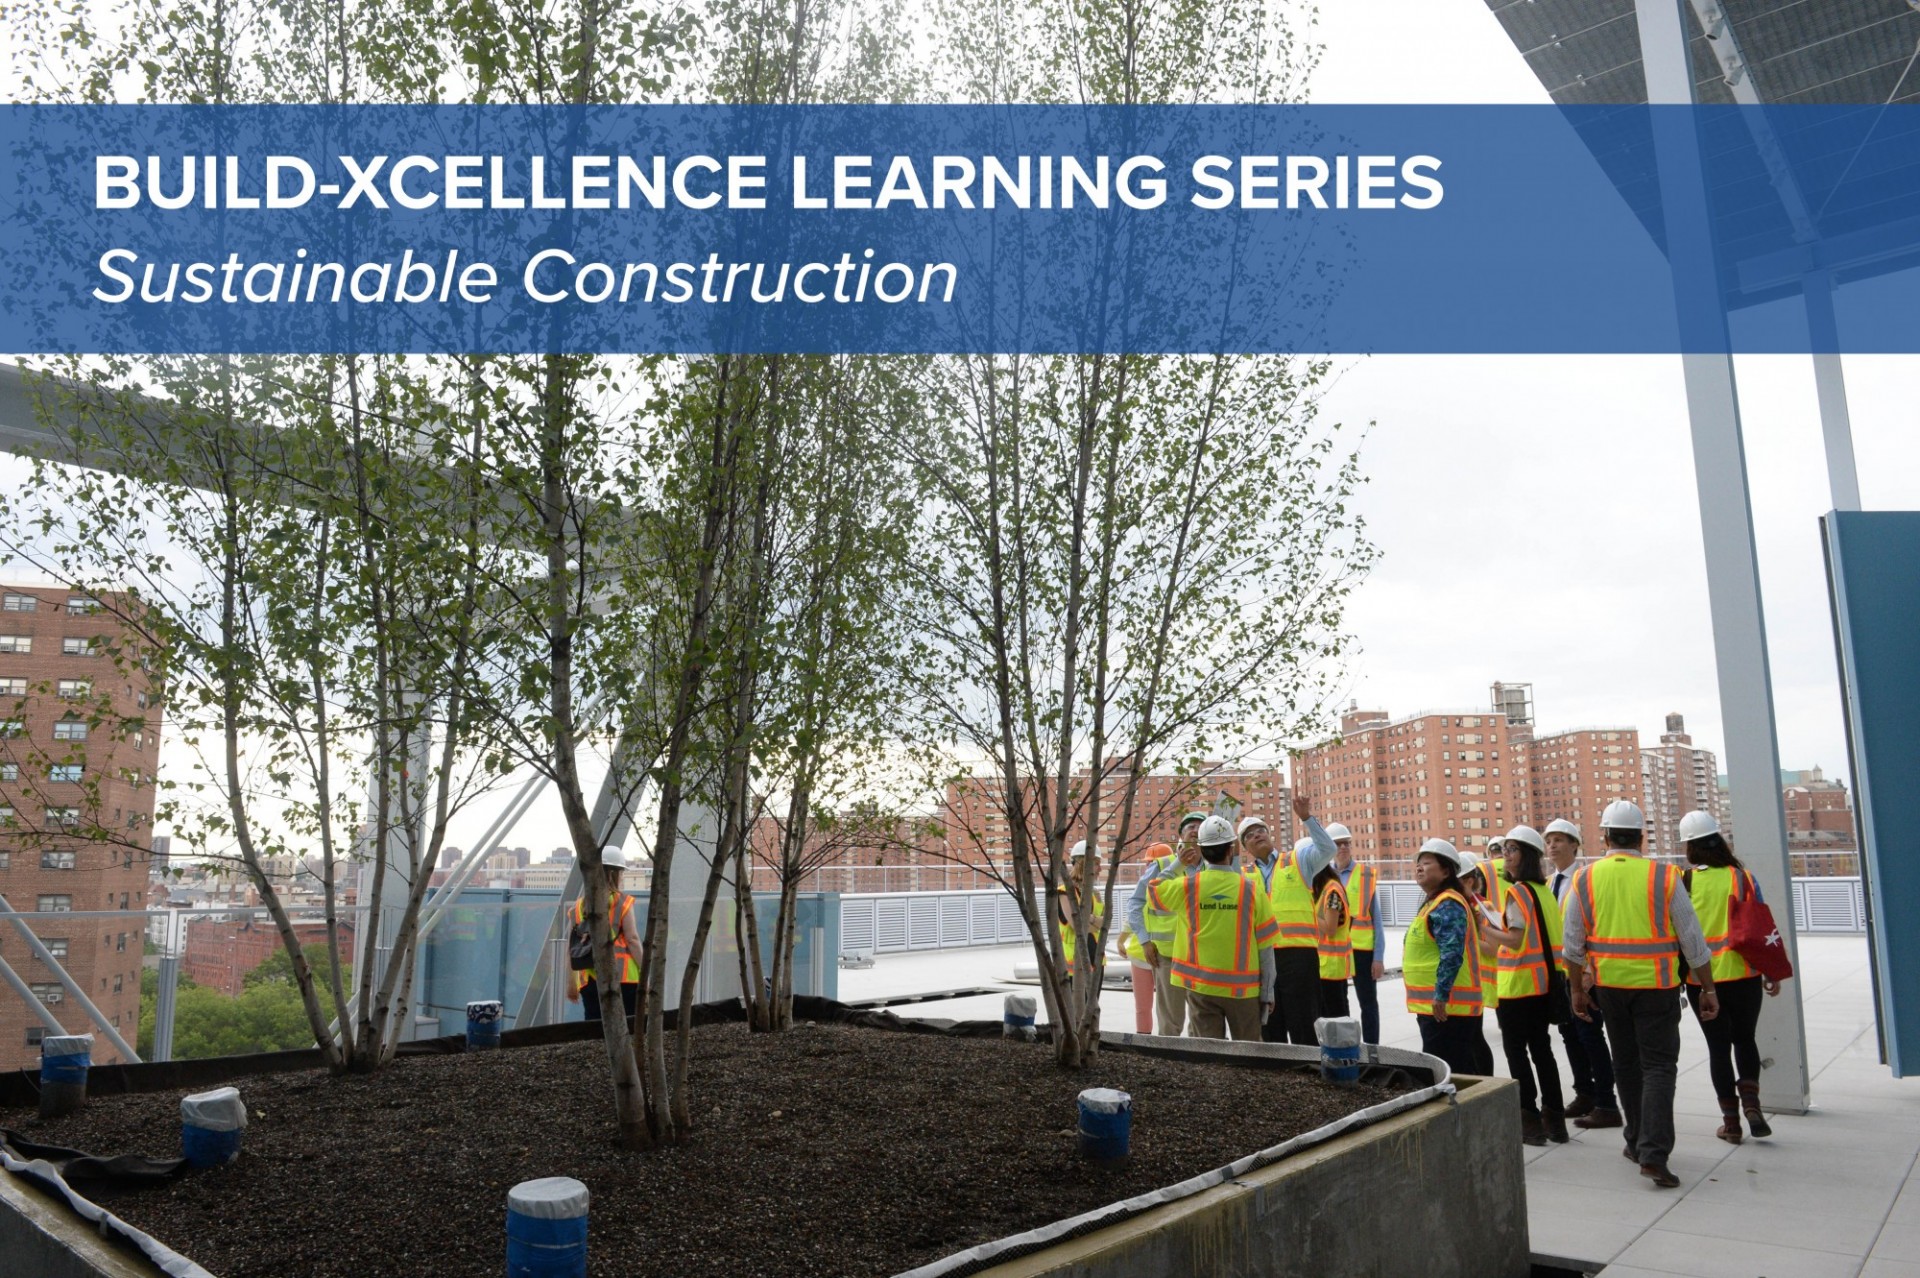 A photo of project managers taking a walkthrough outside of a newly constructed building, with text at the top that says, "BUILD-XCELLENCE LEARNING SERIES: Sustainable Construction."